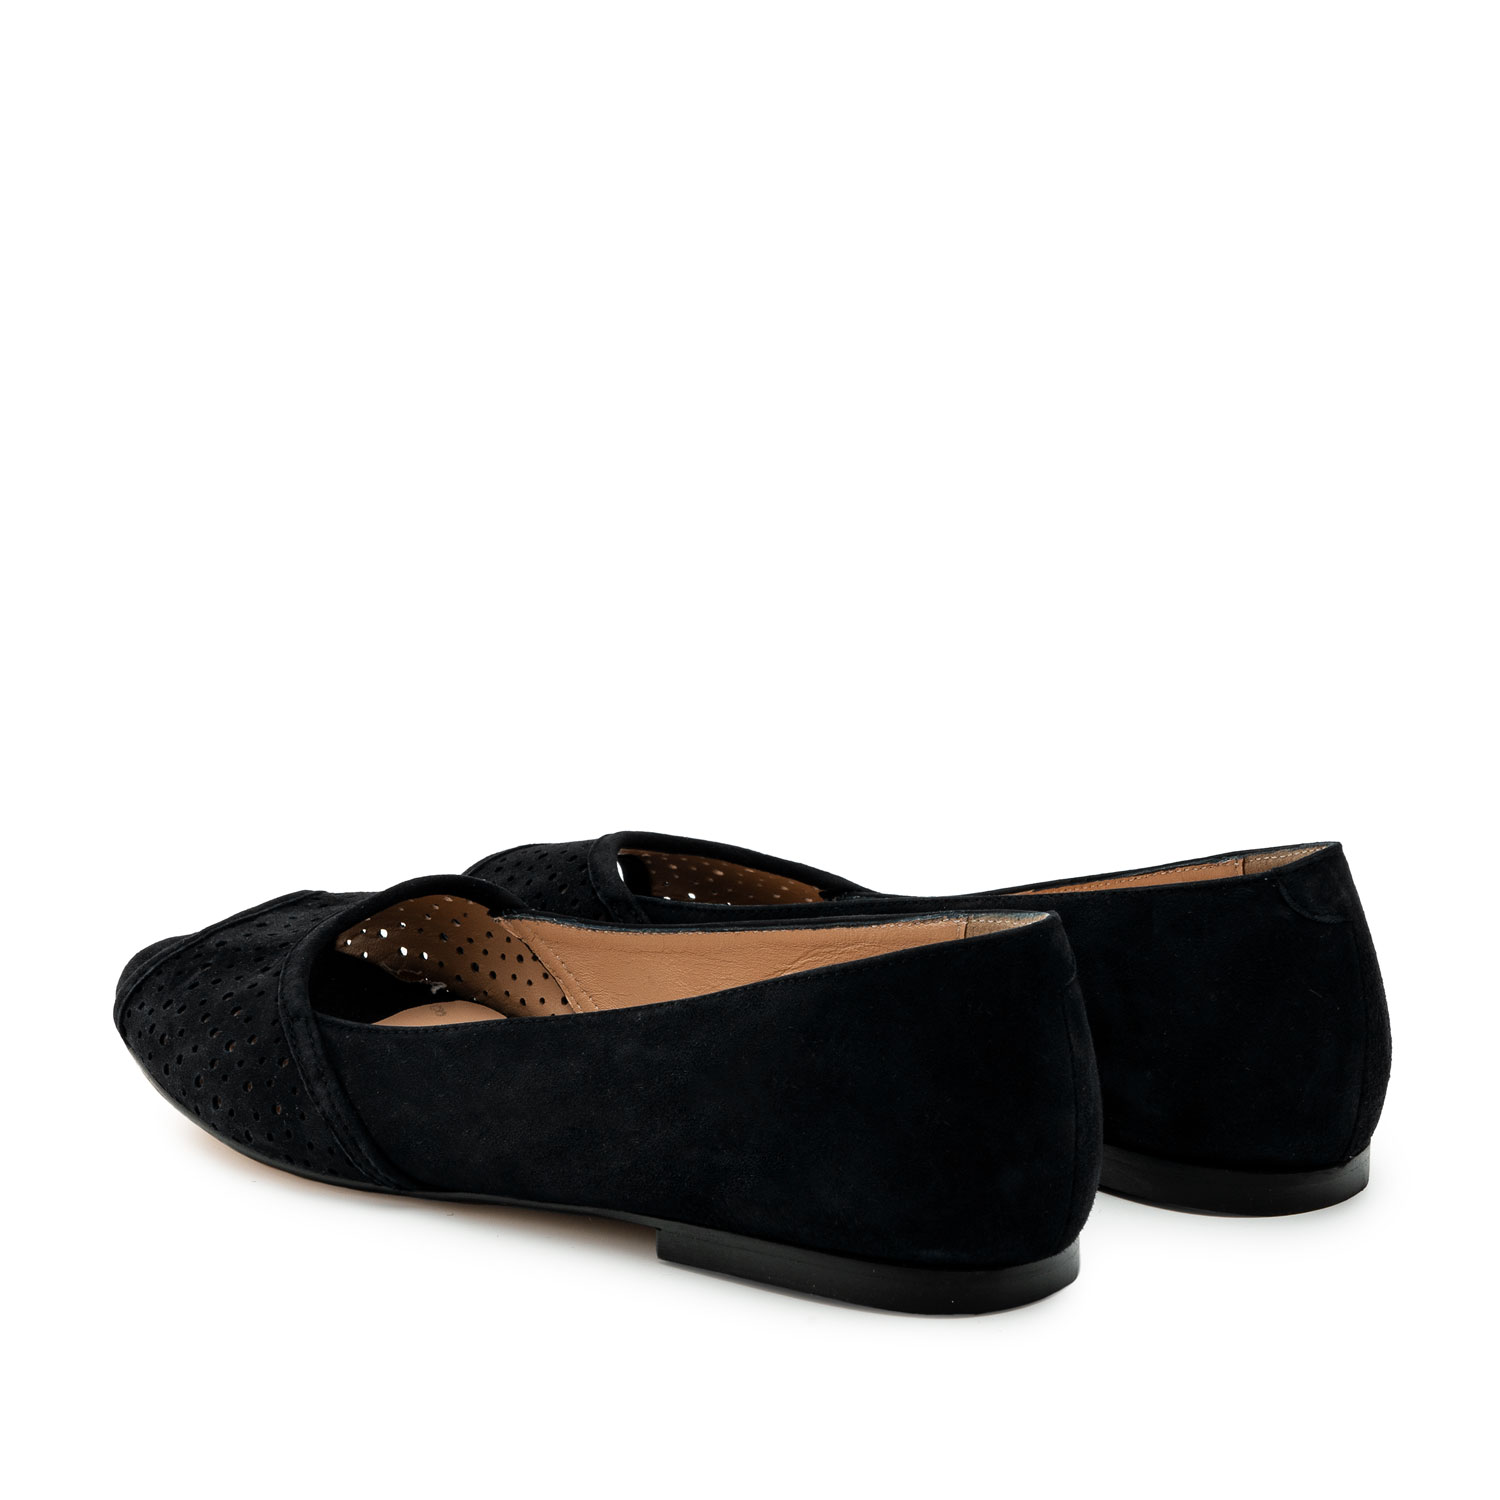 Open Toe Ballet Flats in Black Suede Leather 